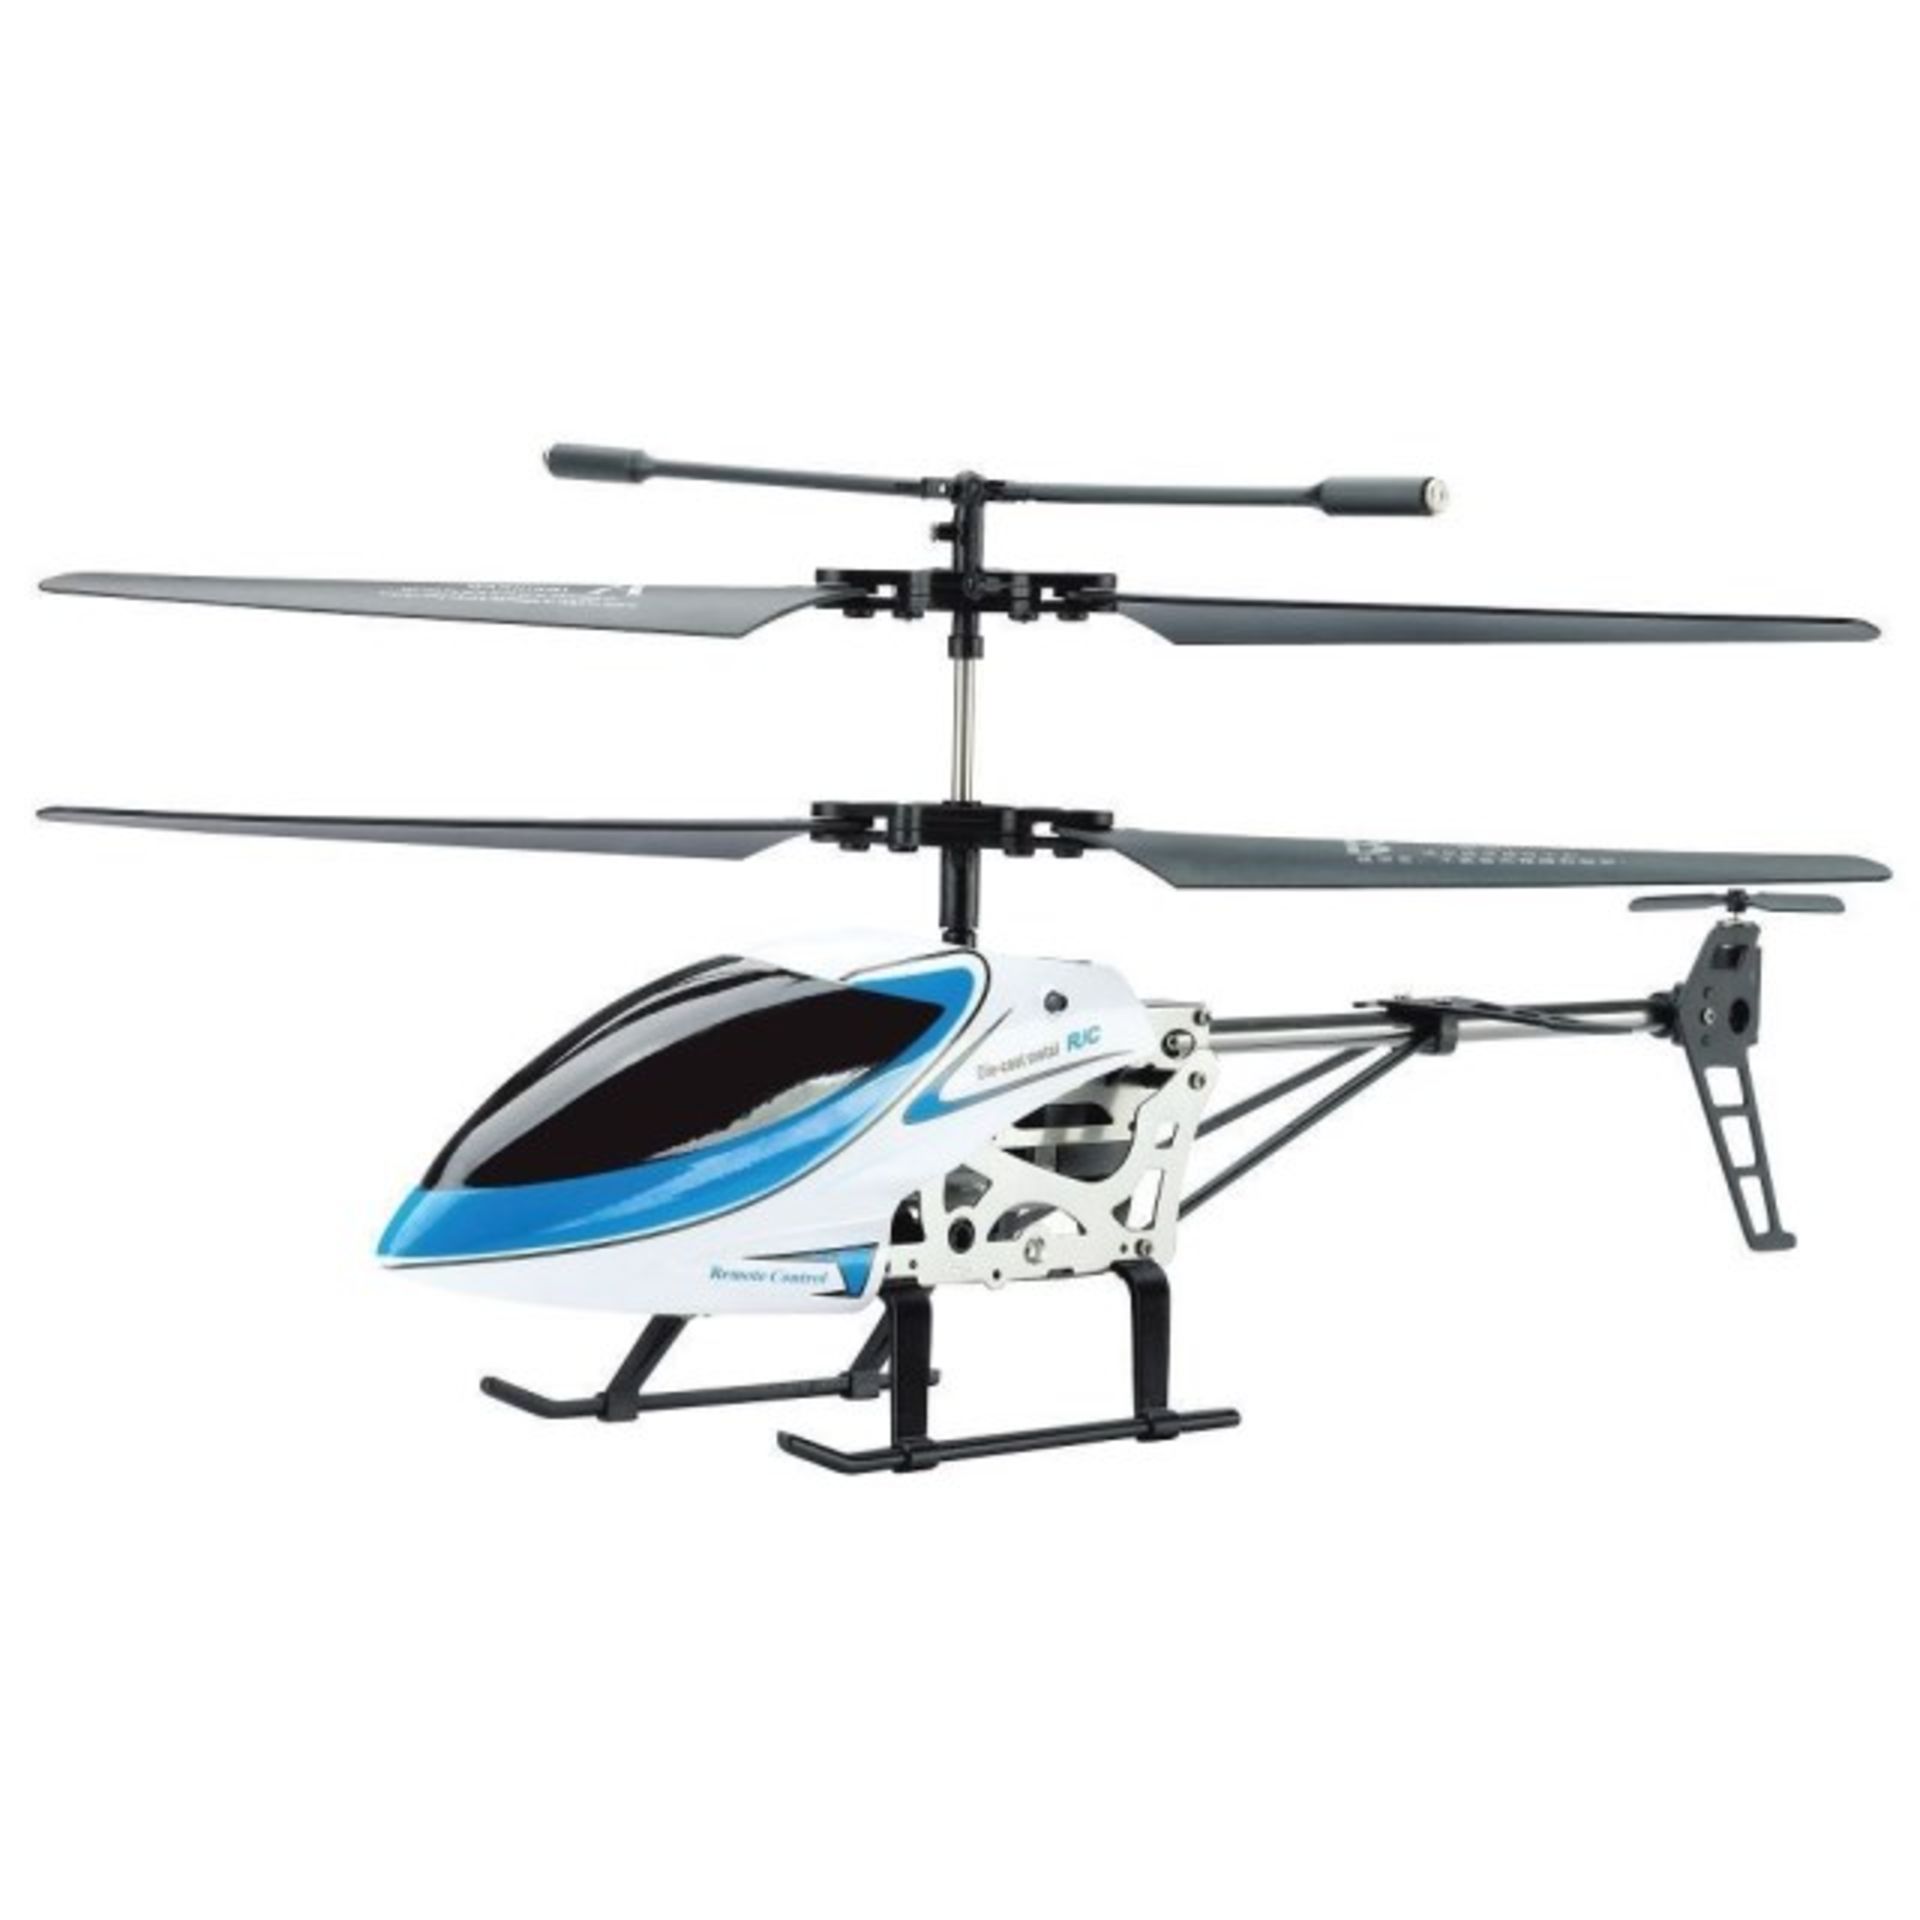 V Brand New 3.5 Channel Infra-Red Control Helicopter Super Steady Rotor Blade System RRP £29.99 X